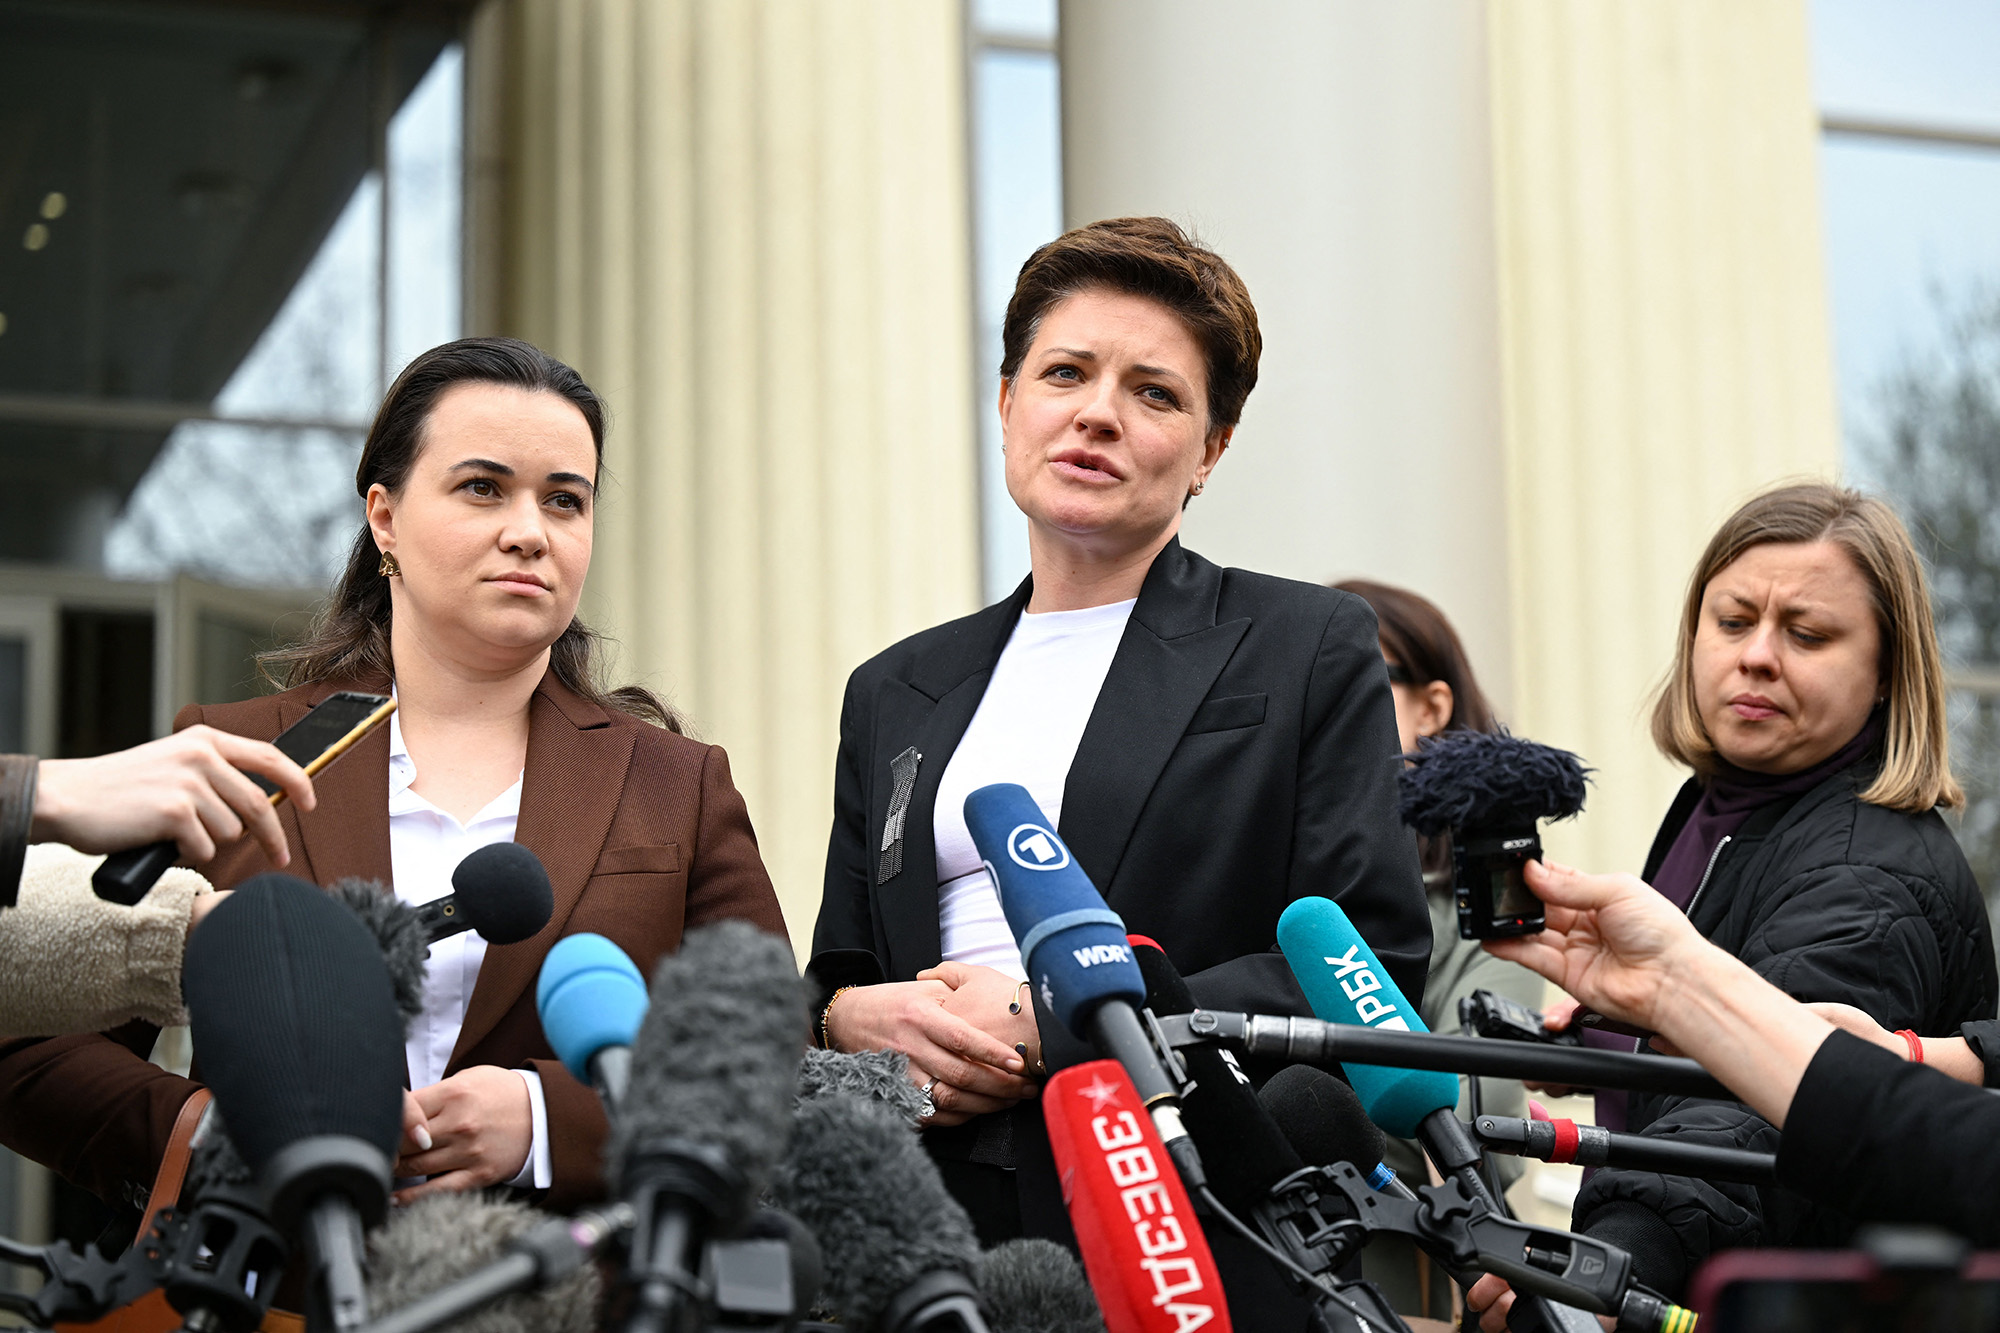 Lawyers Maria Korchagina and Tatiana Nozhkina talk to the media outside the Moscow City Court after a hearing to consider an appeal on the arrest of US journalist Evan Gershkovich, held on espionage charges, in Moscow on April 18, 2023. (Photo by NATALIA KOLESNIKOVA / AFP) (Photo by NATALIA KOLESNIKOVA/AFP via Getty Images)